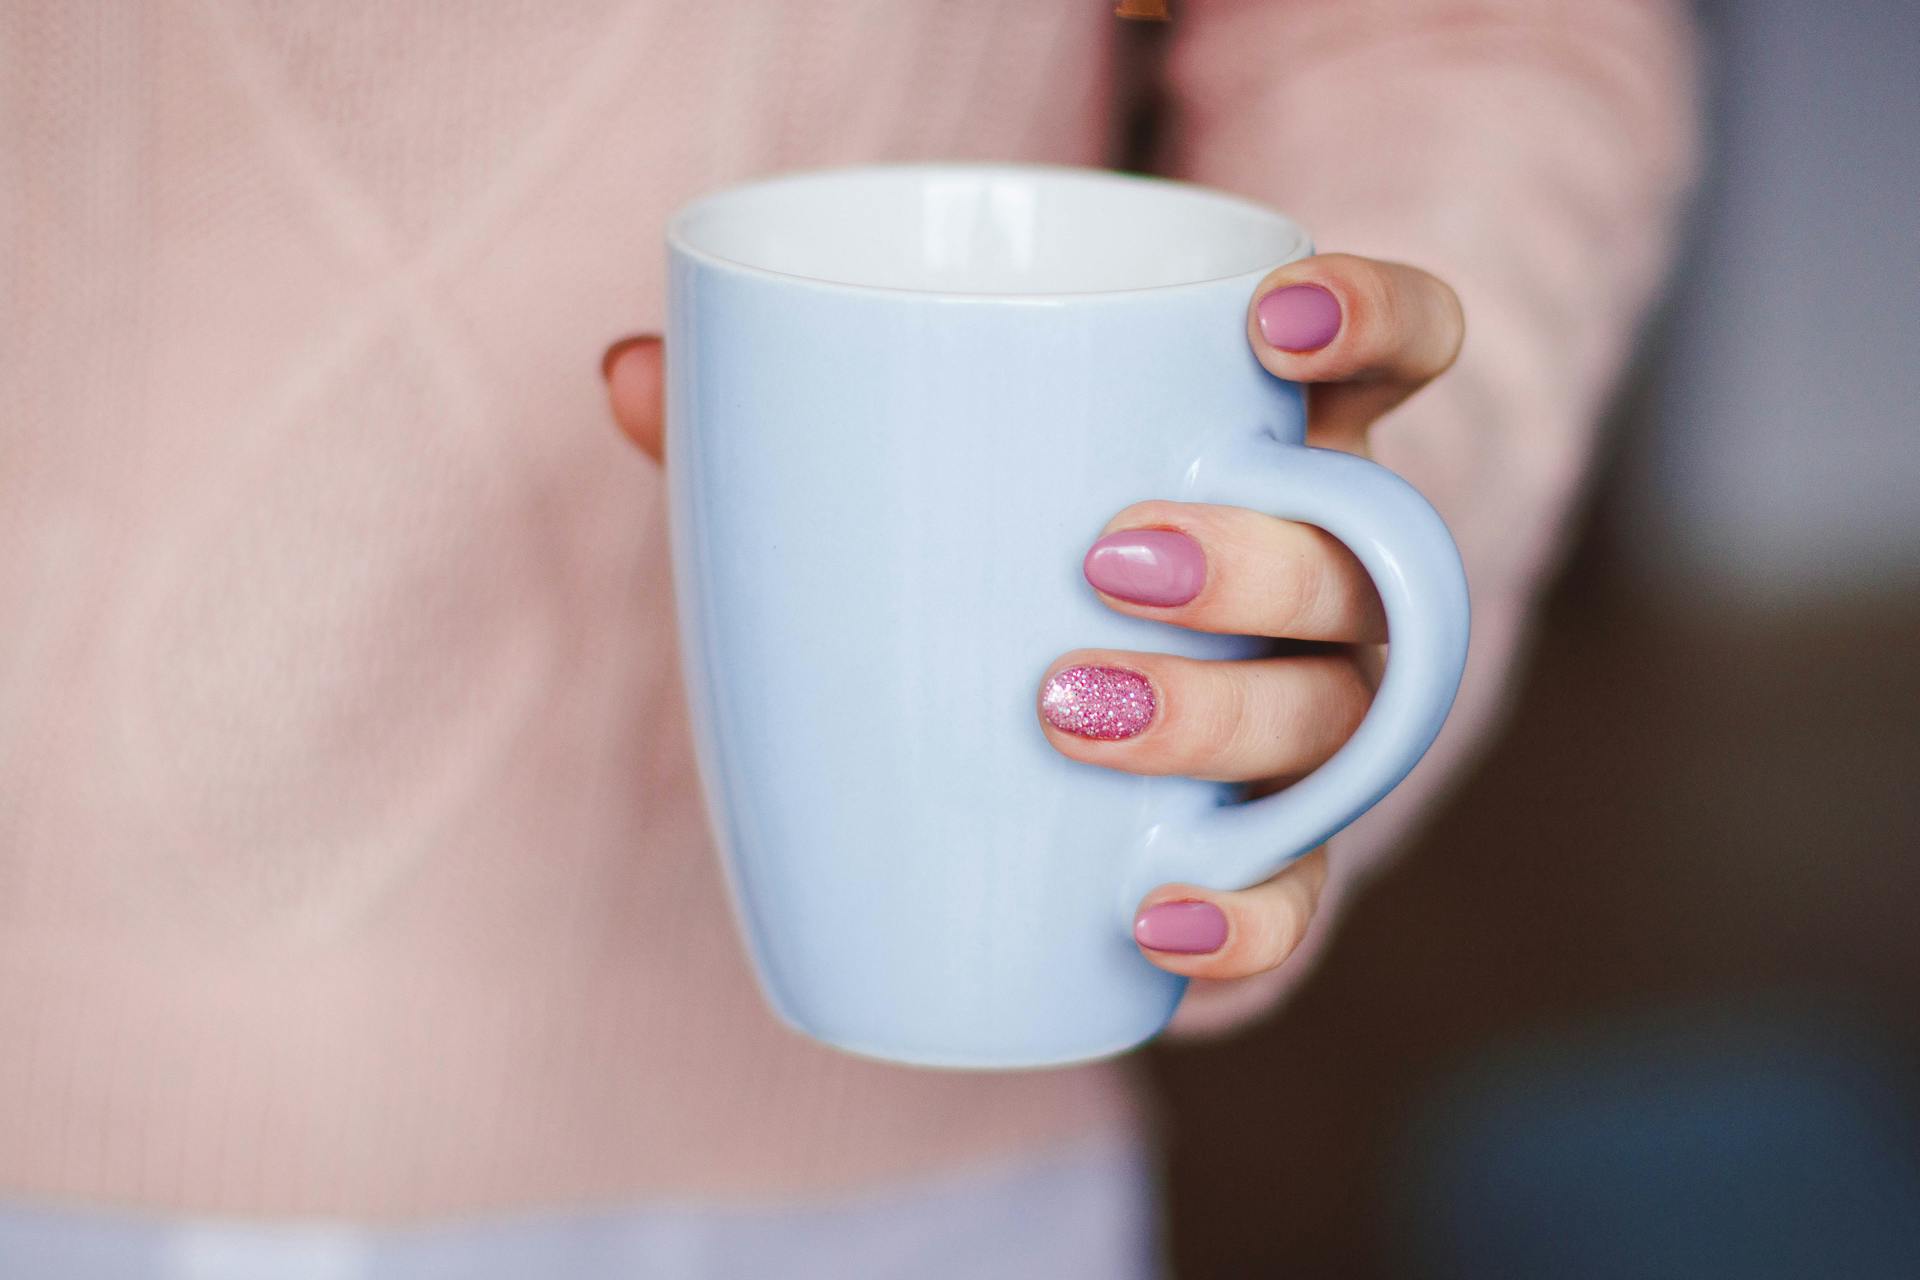 A person holding a white mug | Source: Pexels